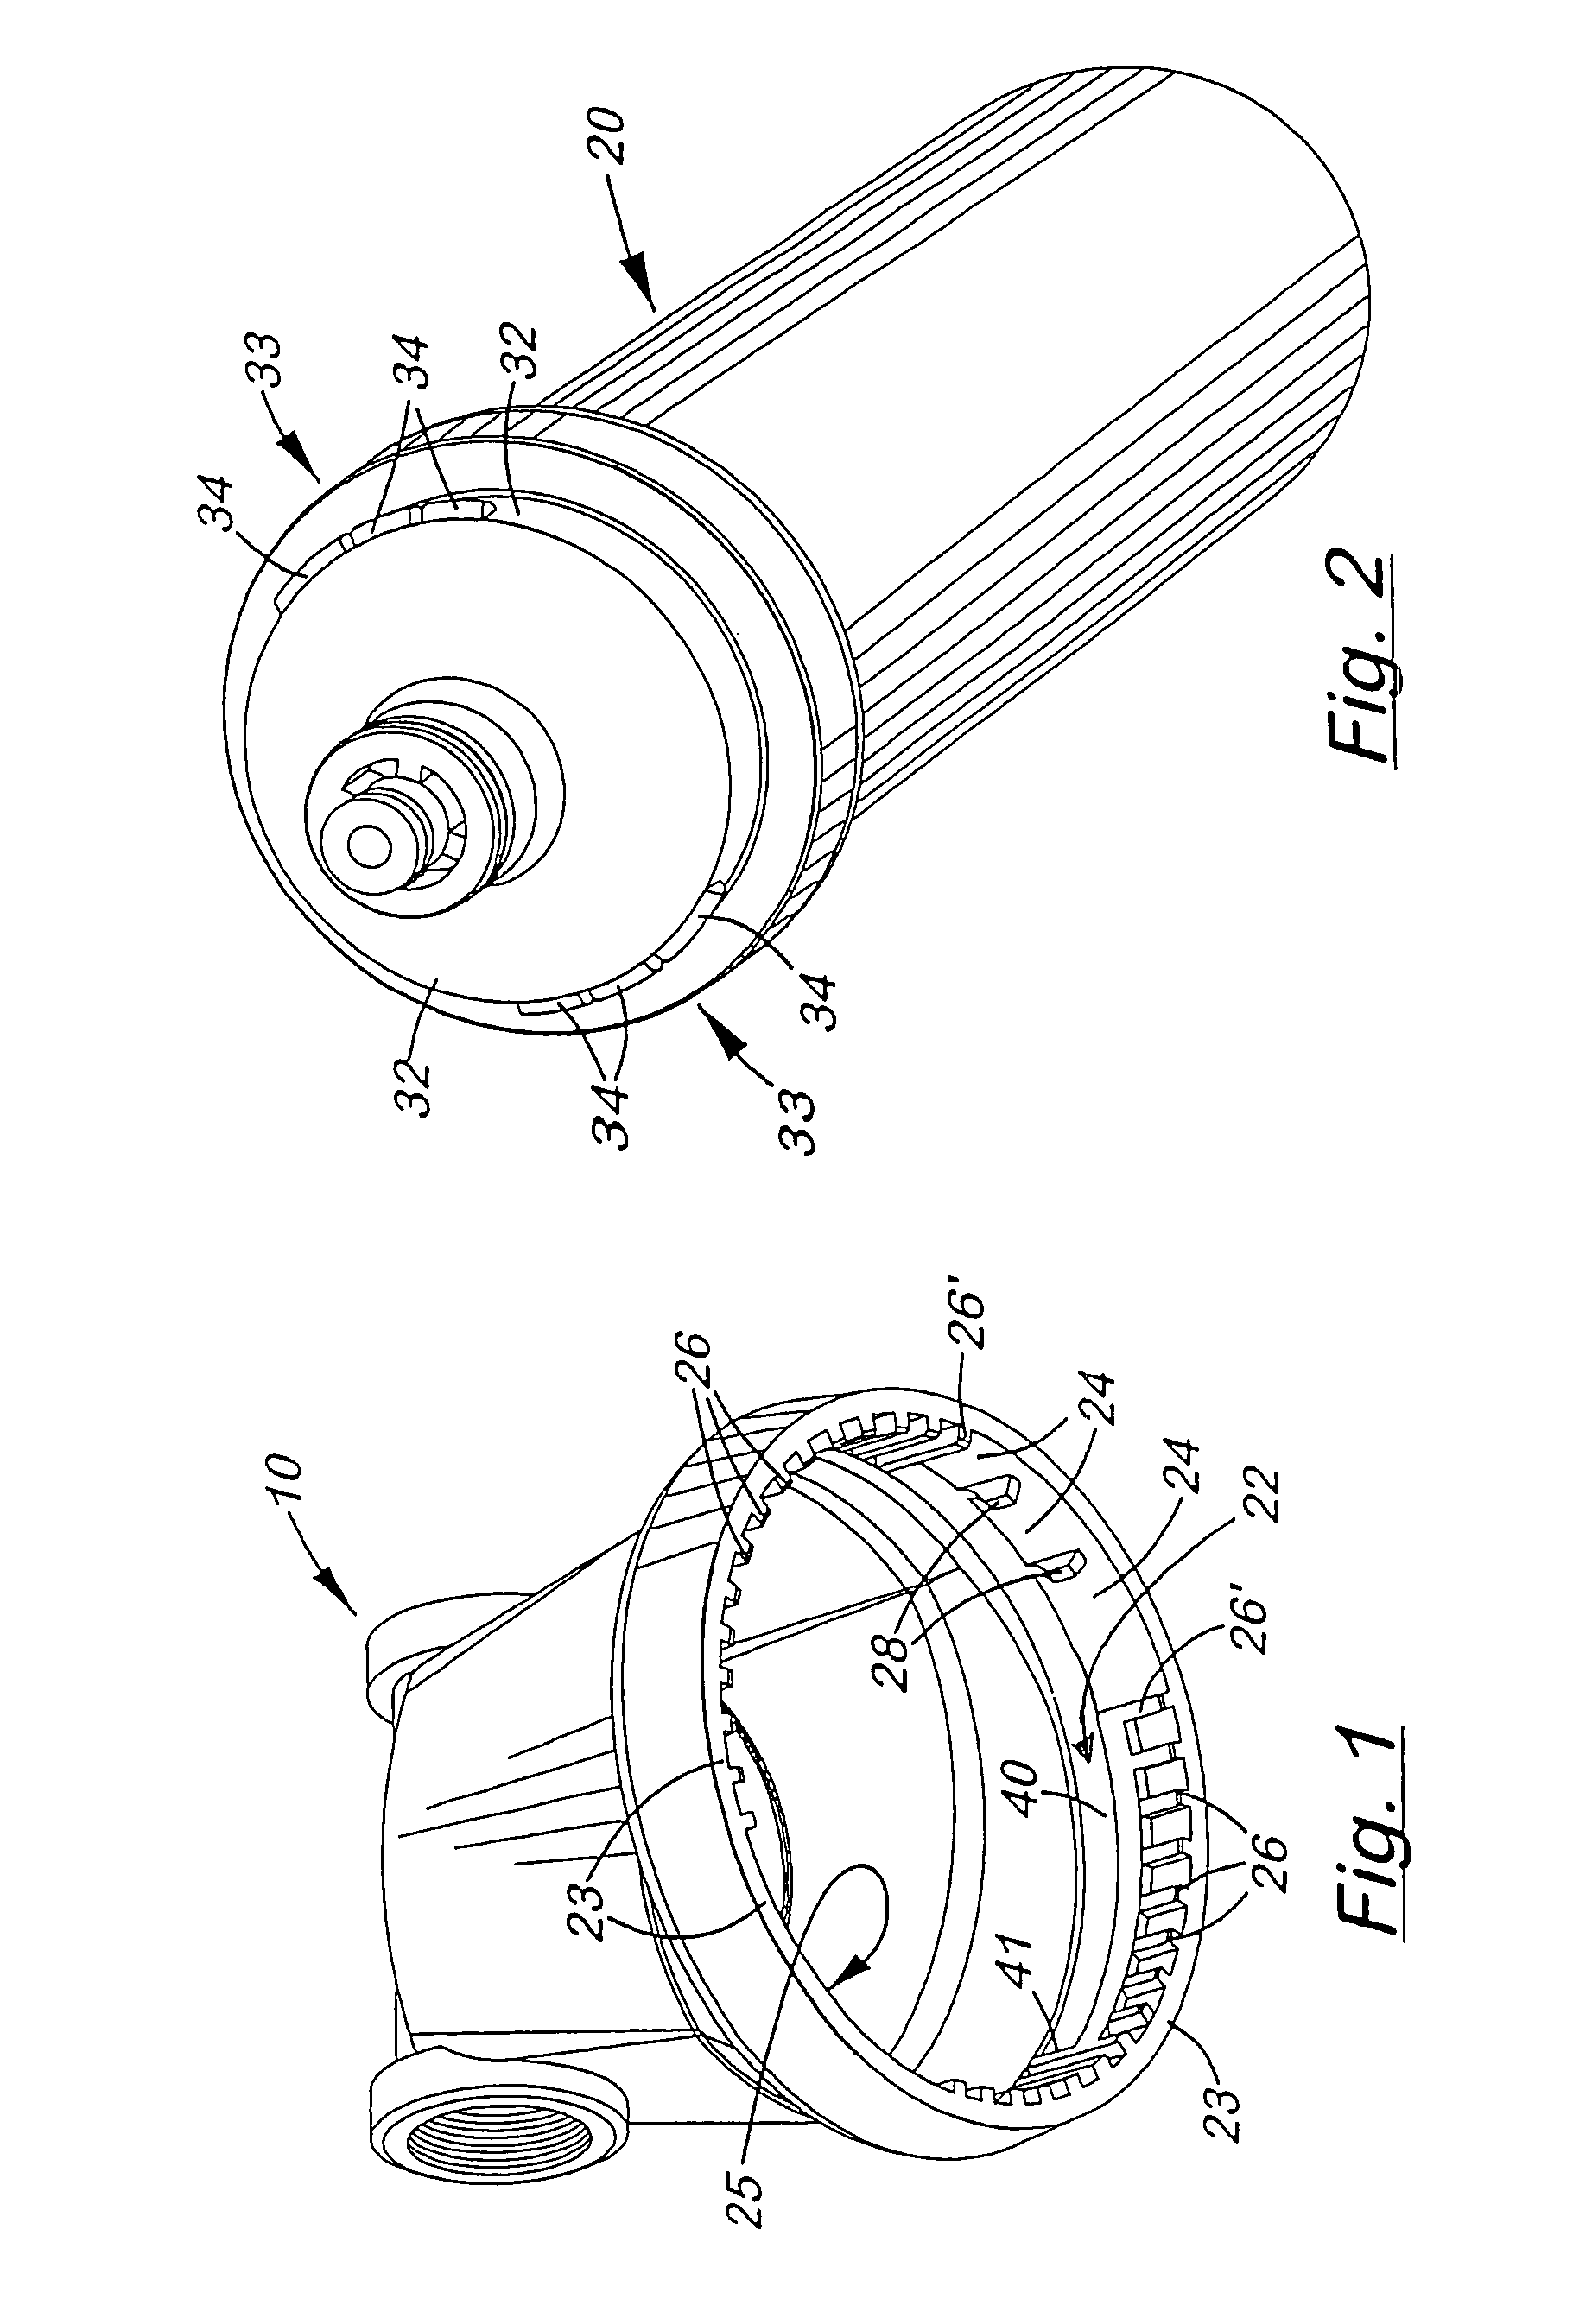 Keyed system for connection of filter cartridge to filter holder